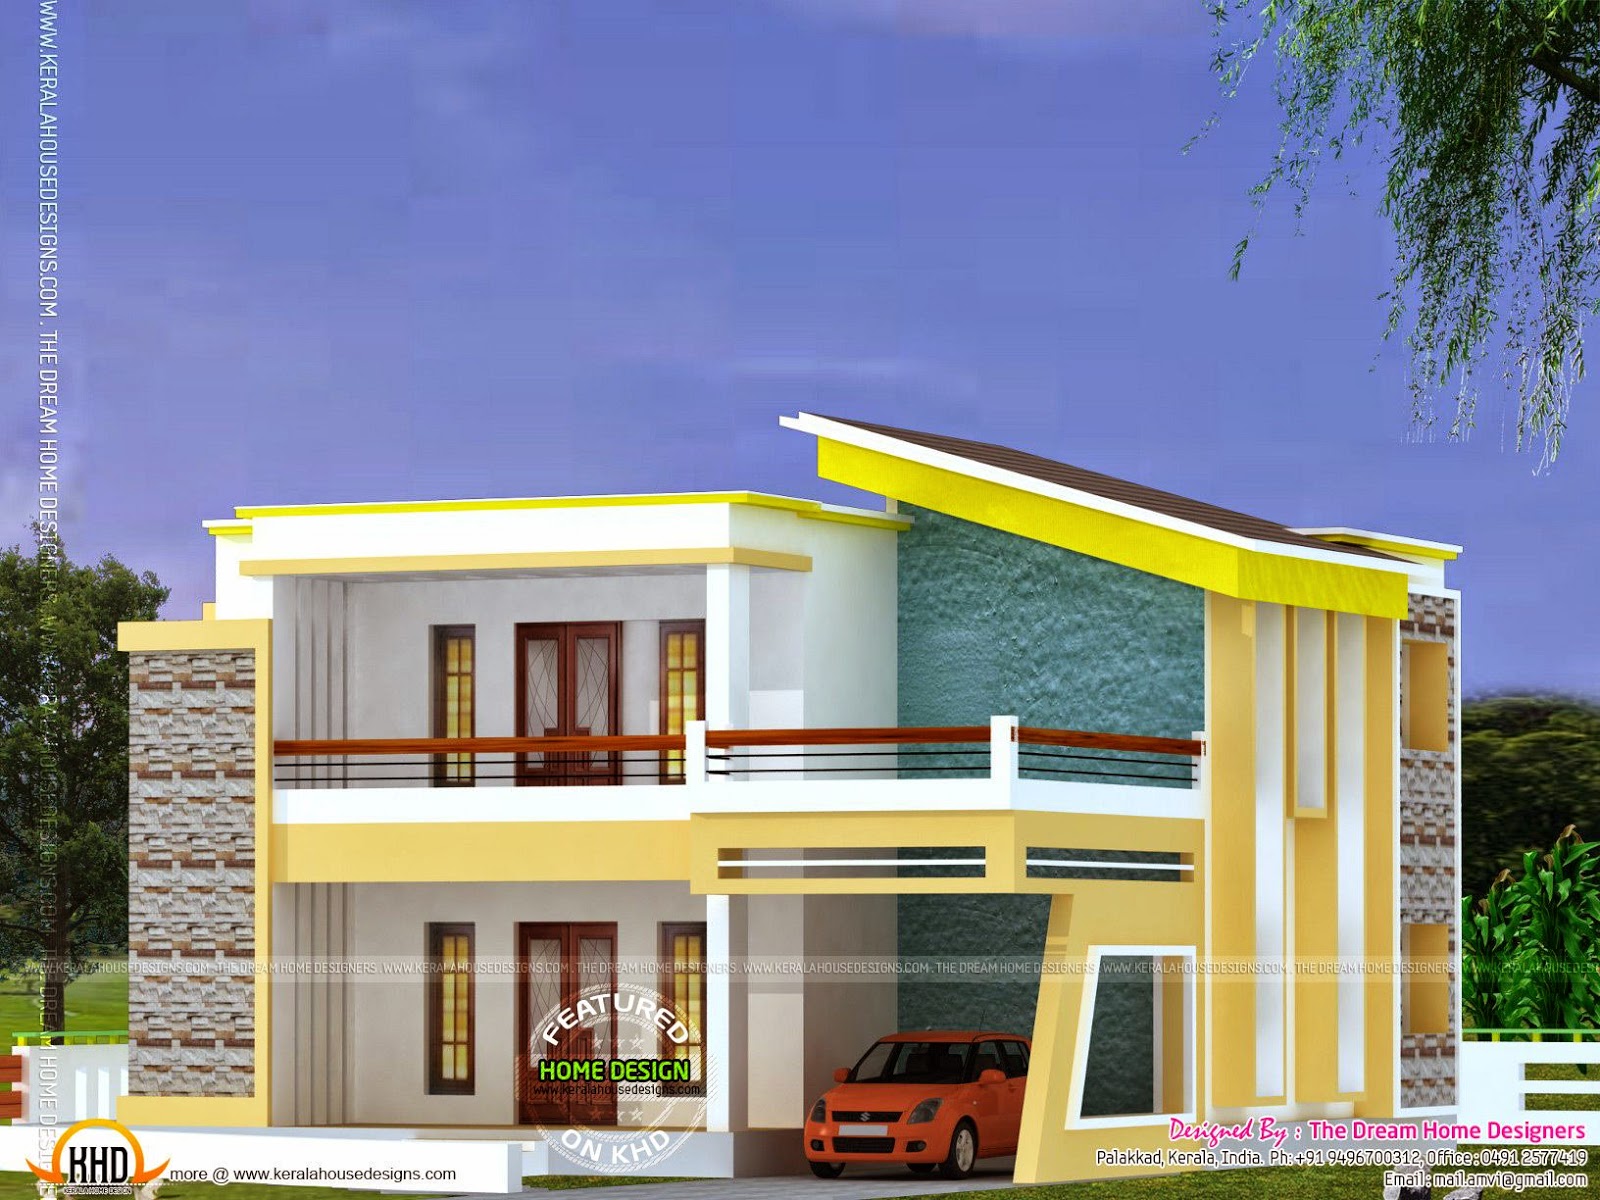 Flat roof house plan and elevation - Kerala home design ...